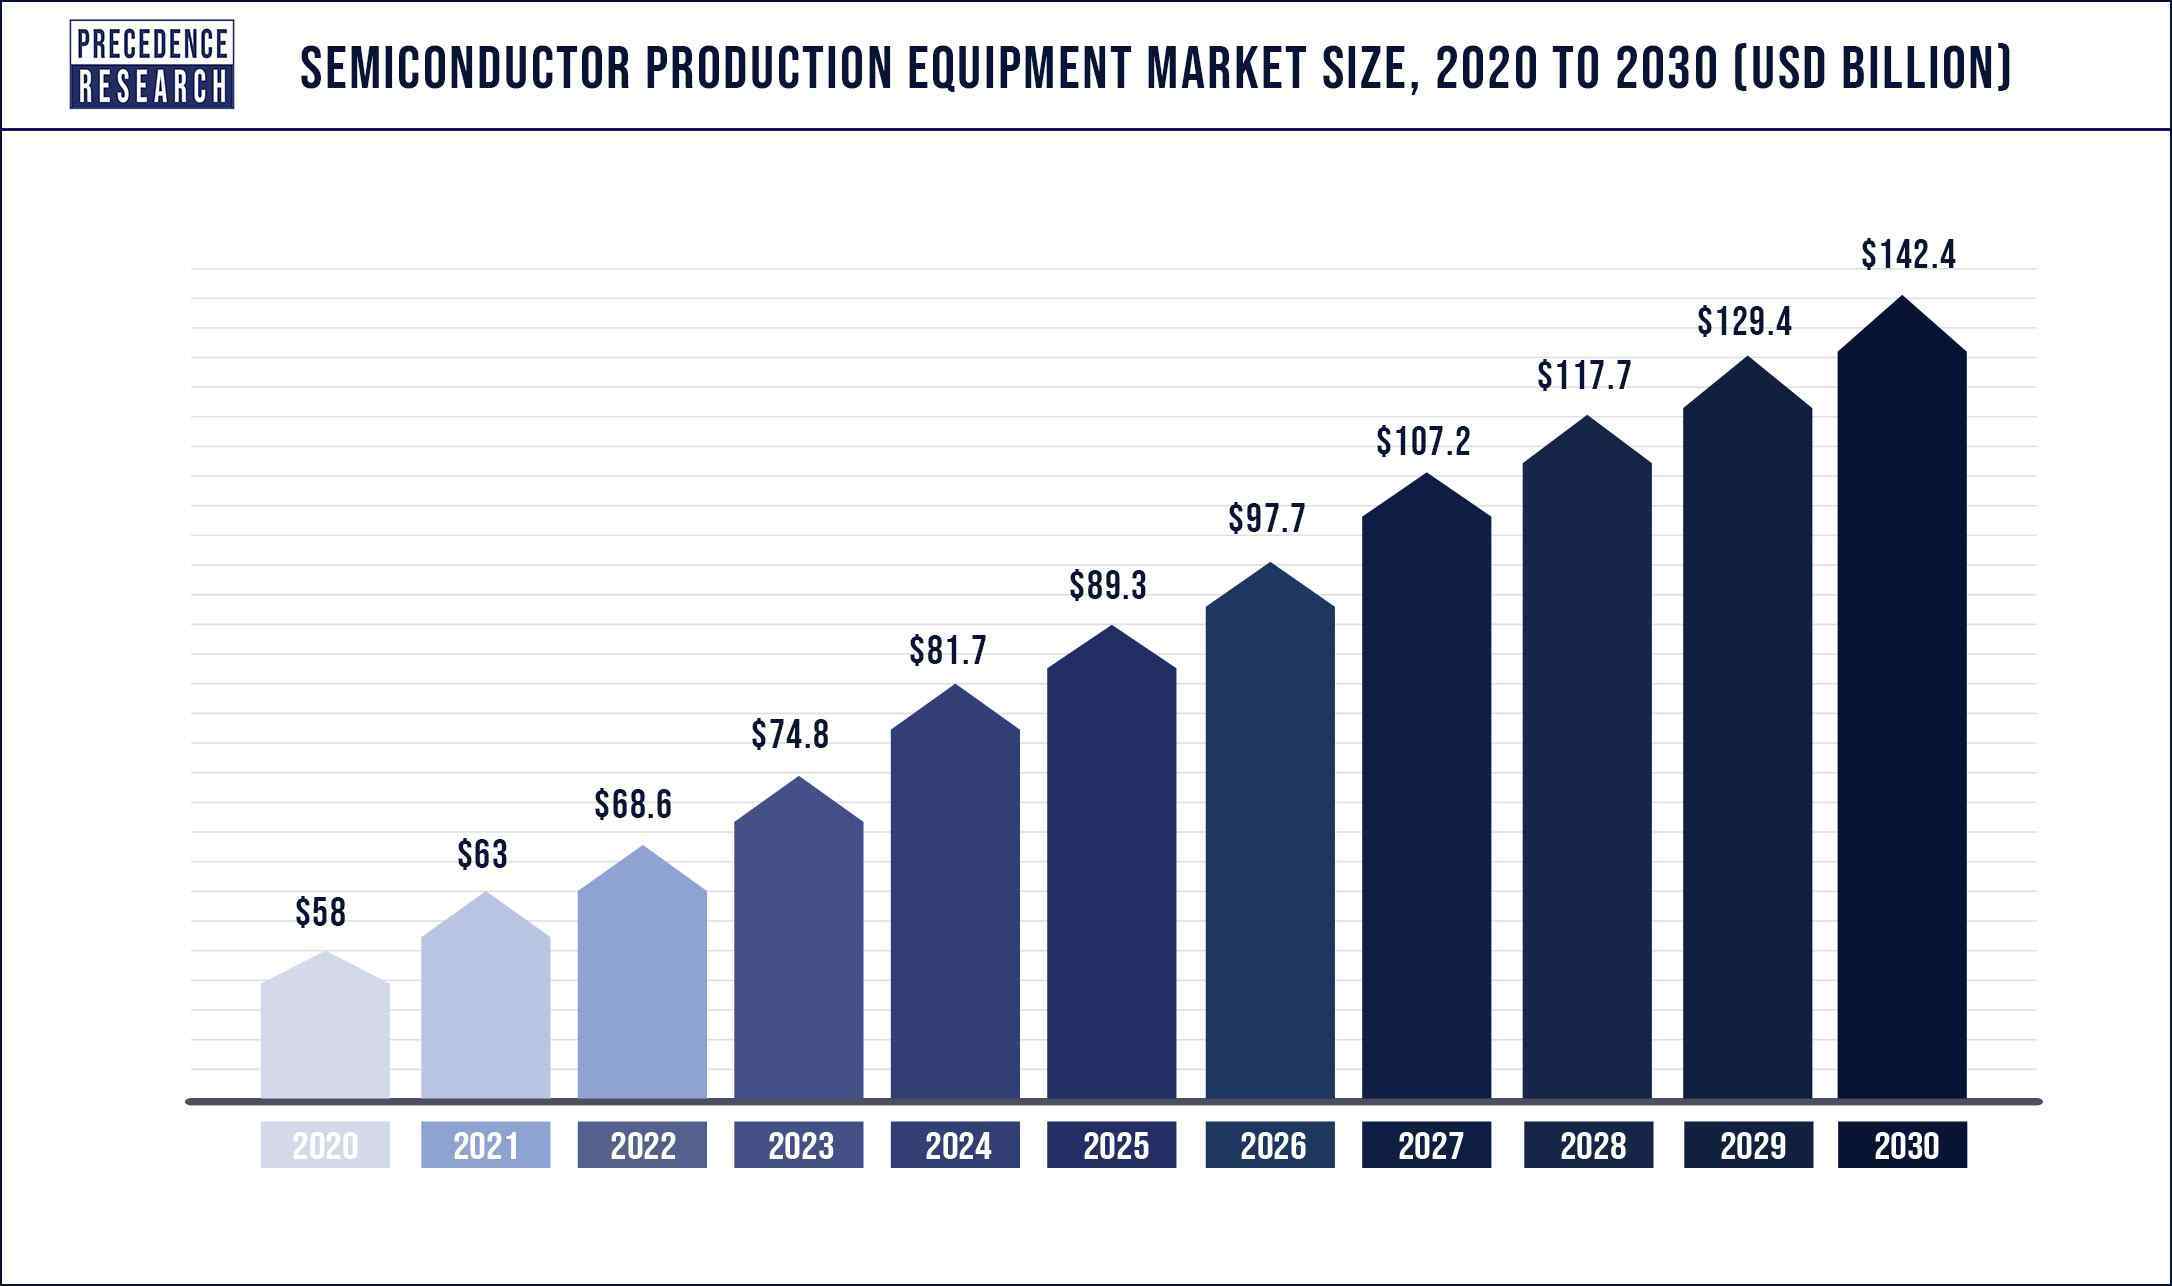 Semiconductor-Production-Equipment-Market-Size-2020-to-2030